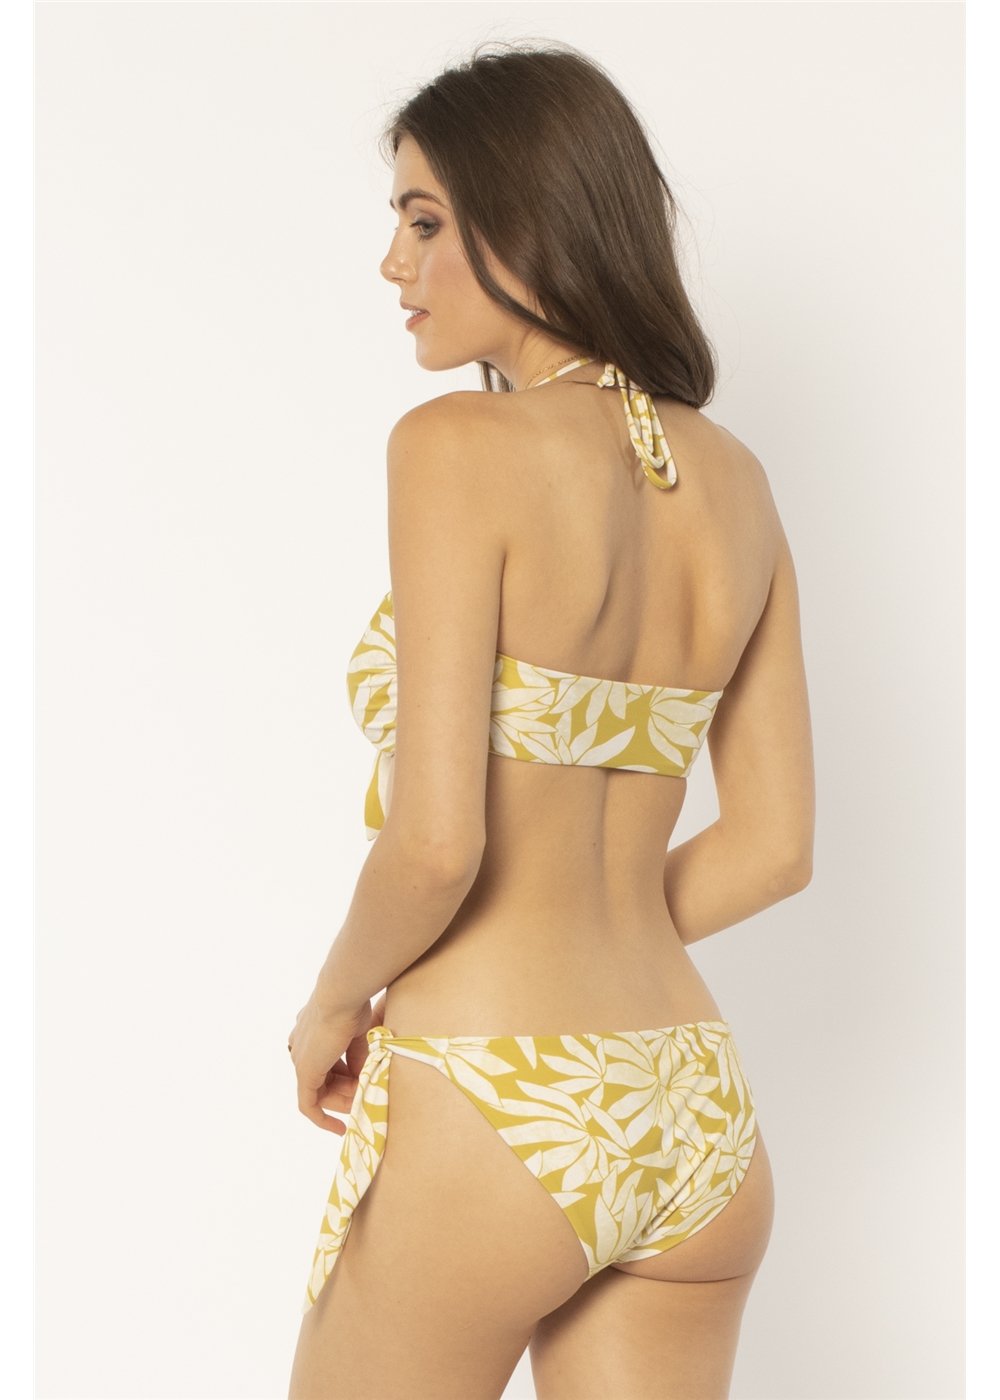 Amuse Society Women's bamboo agave luna bandeau. Rear View.